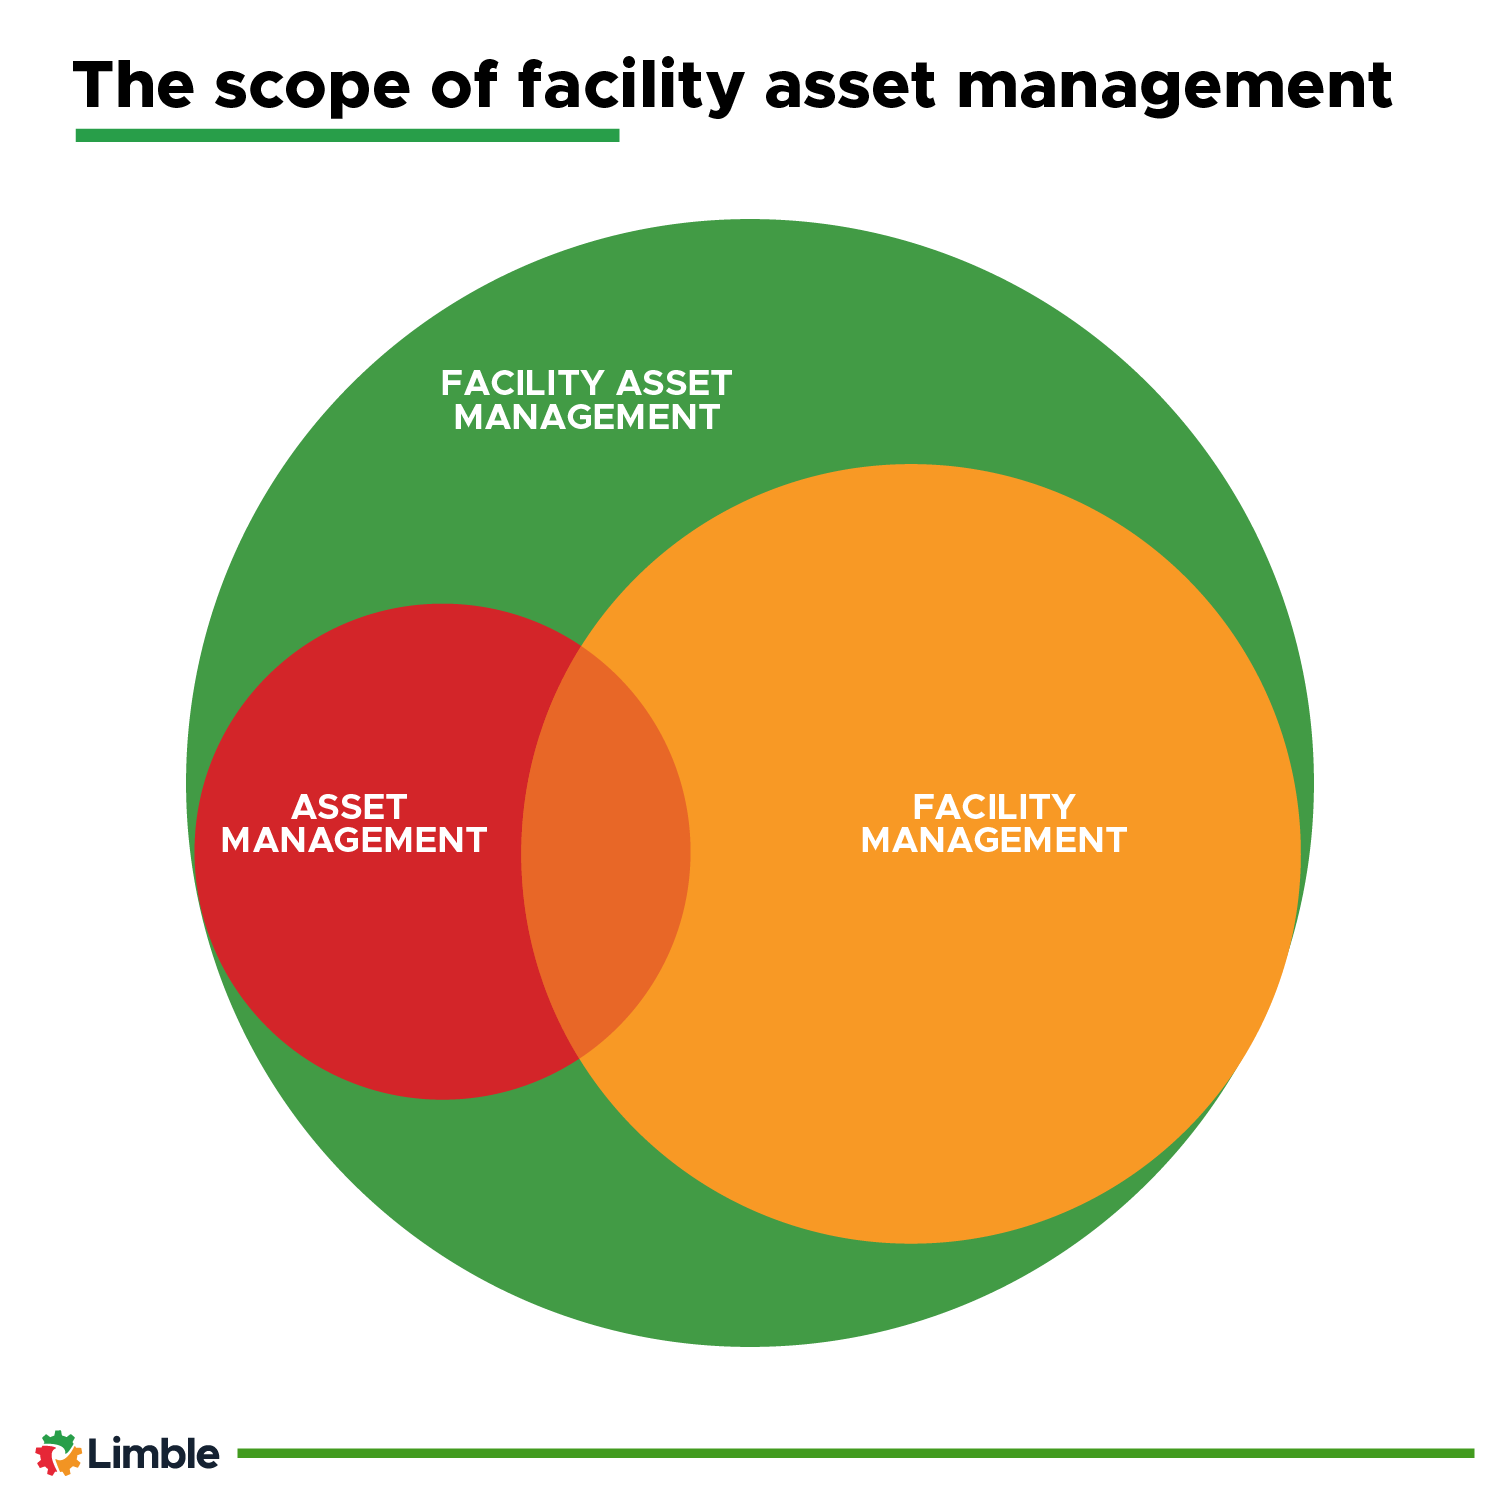 The scope of facility asset management in relation to asset and facility management.